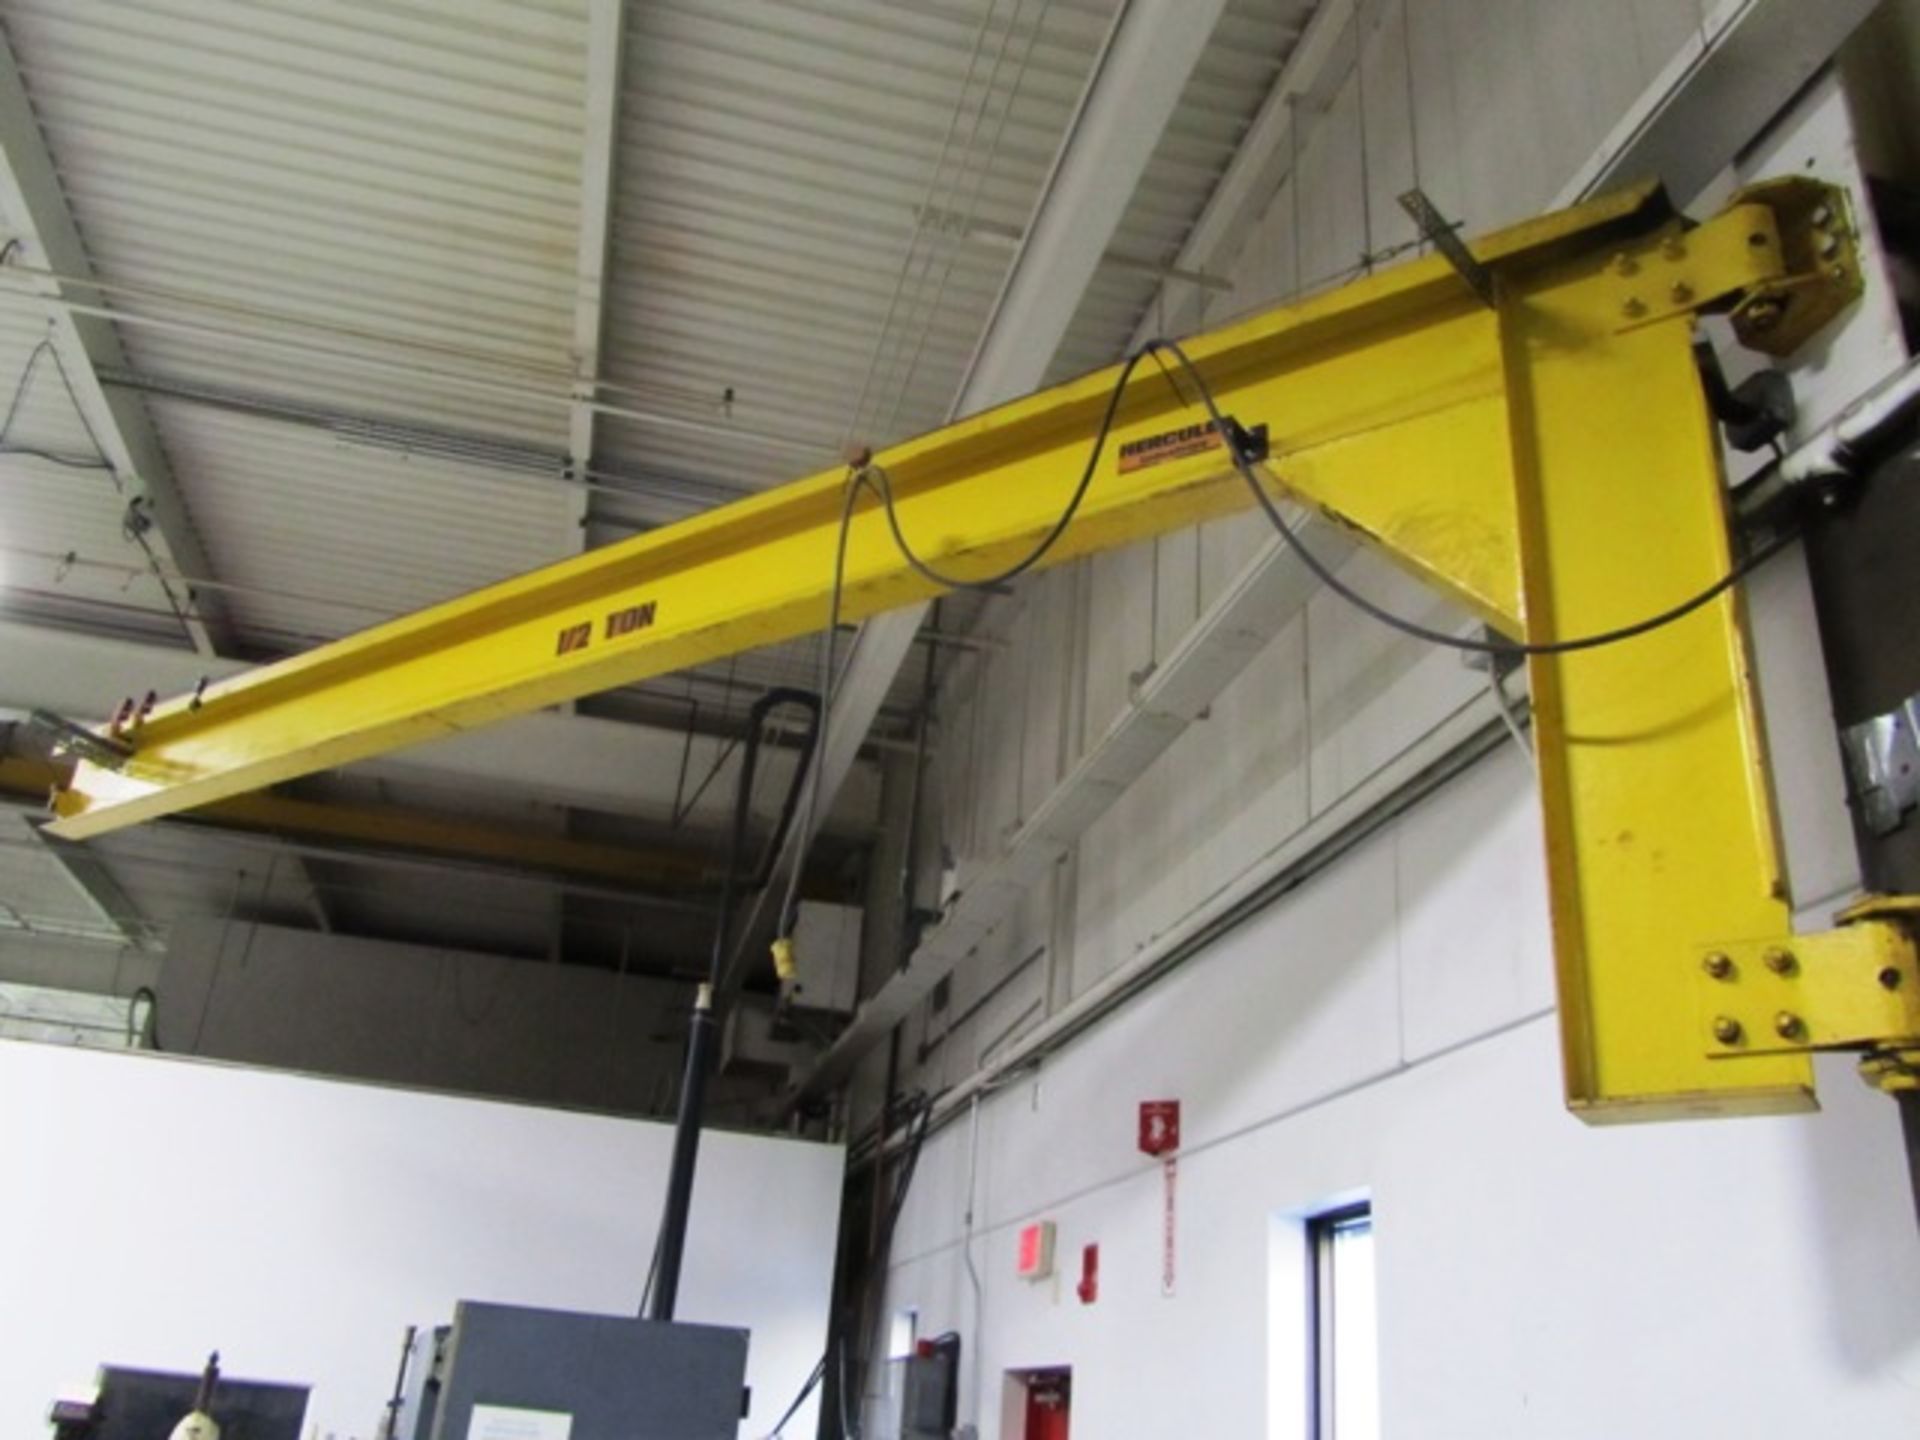 1/2 Ton Jib (on wall) with 1/2 Ton CM Electric Hoist with Pendant Control (on floor)